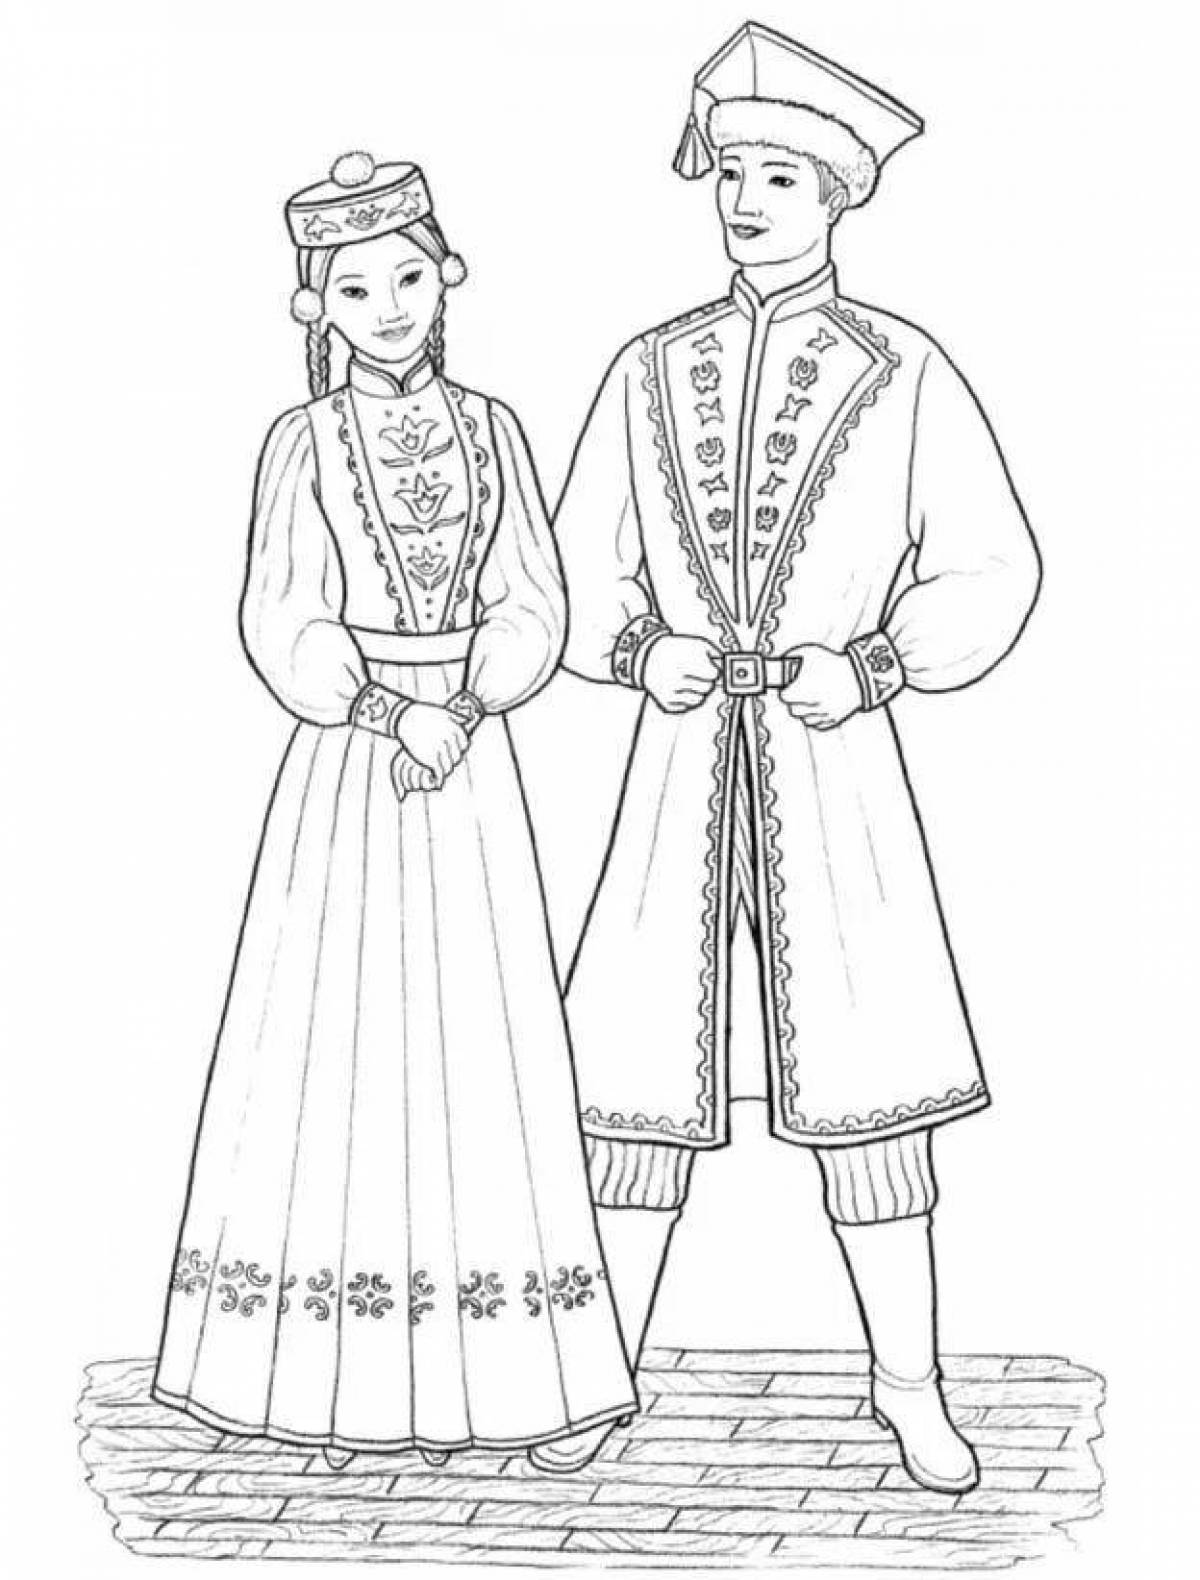 Animated people coloring pages